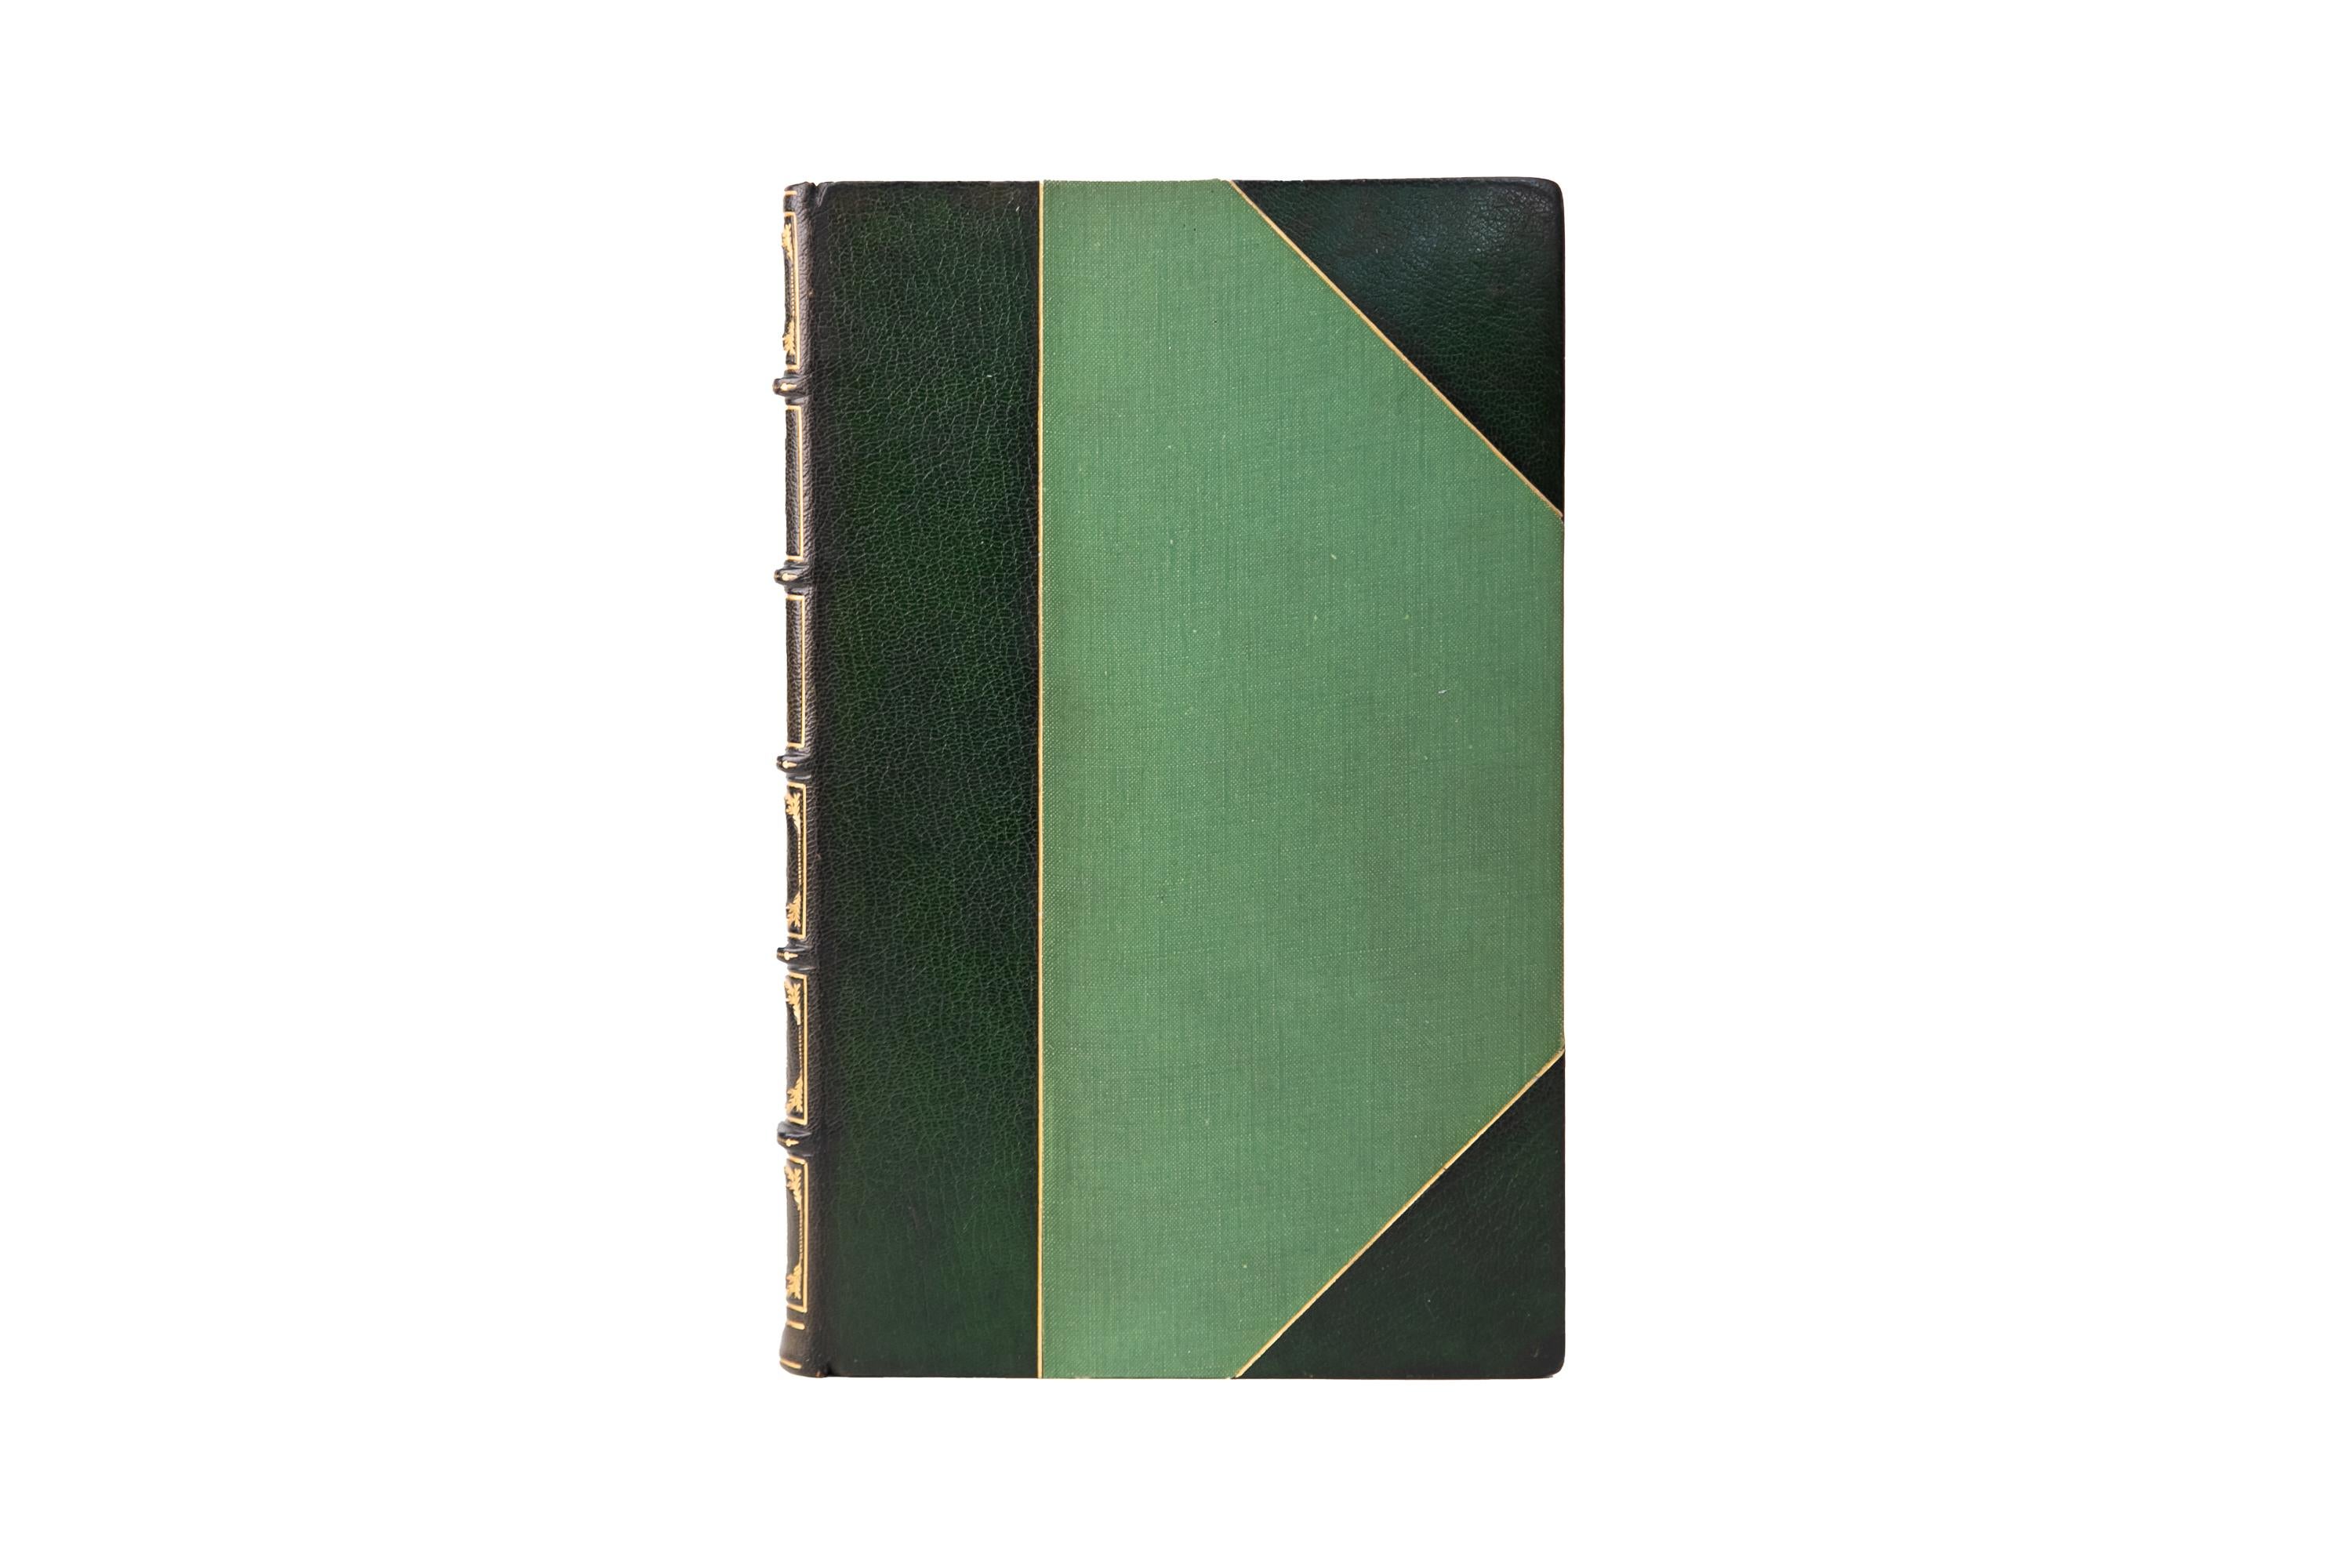 2 Volumes. Daniel Defoe, Robinson Crusoe. Bound in 3/4 green morocco and linen boards bordered in gilt-tooling. Raised band spines with gilt-tooled detailing. Top edges gilt with marbled endpapers. Embellished with engravings from designs by Thomas